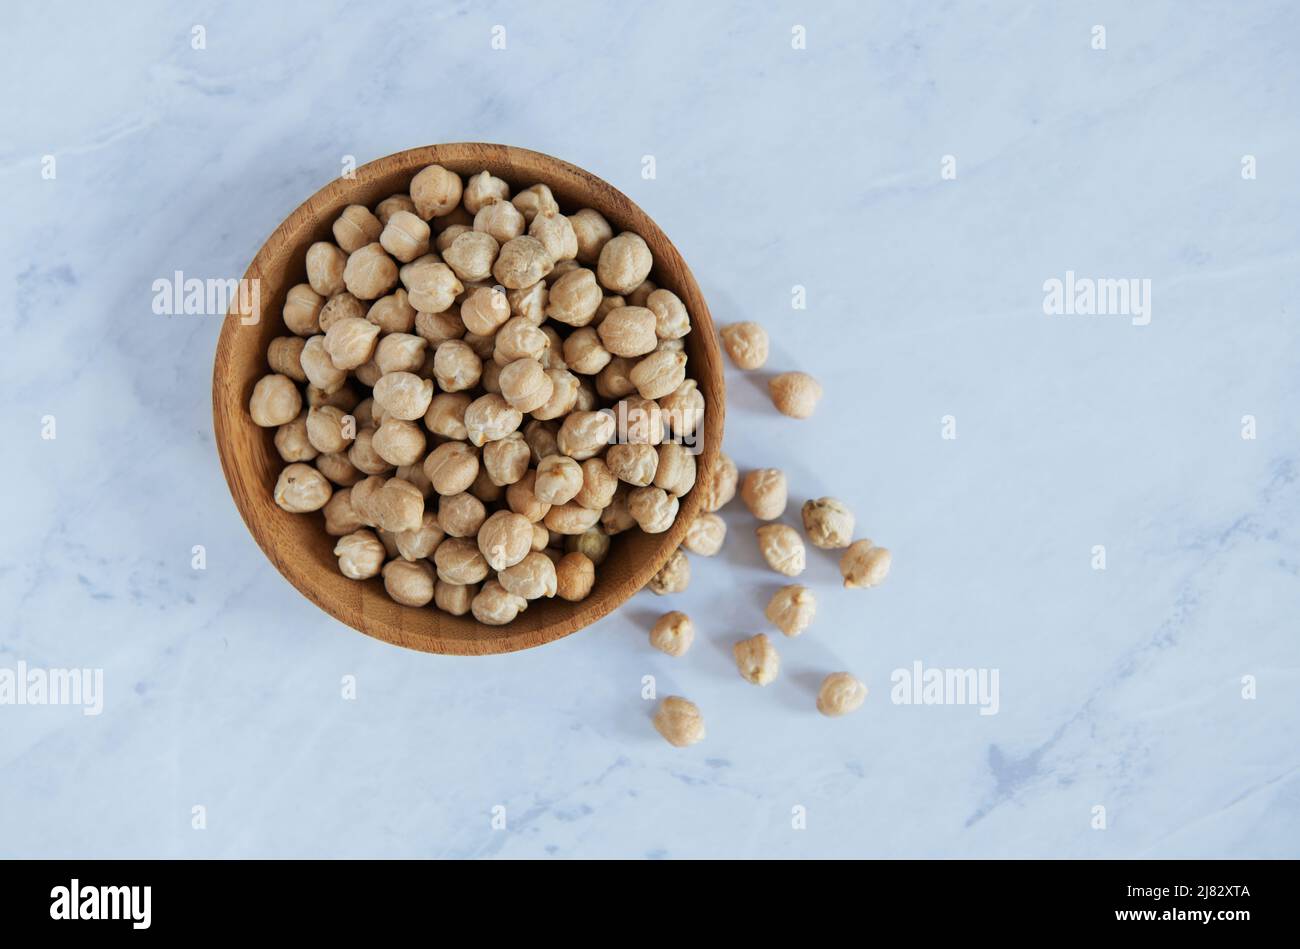 Wooden bowl with Garbanzo beans Stock Photo